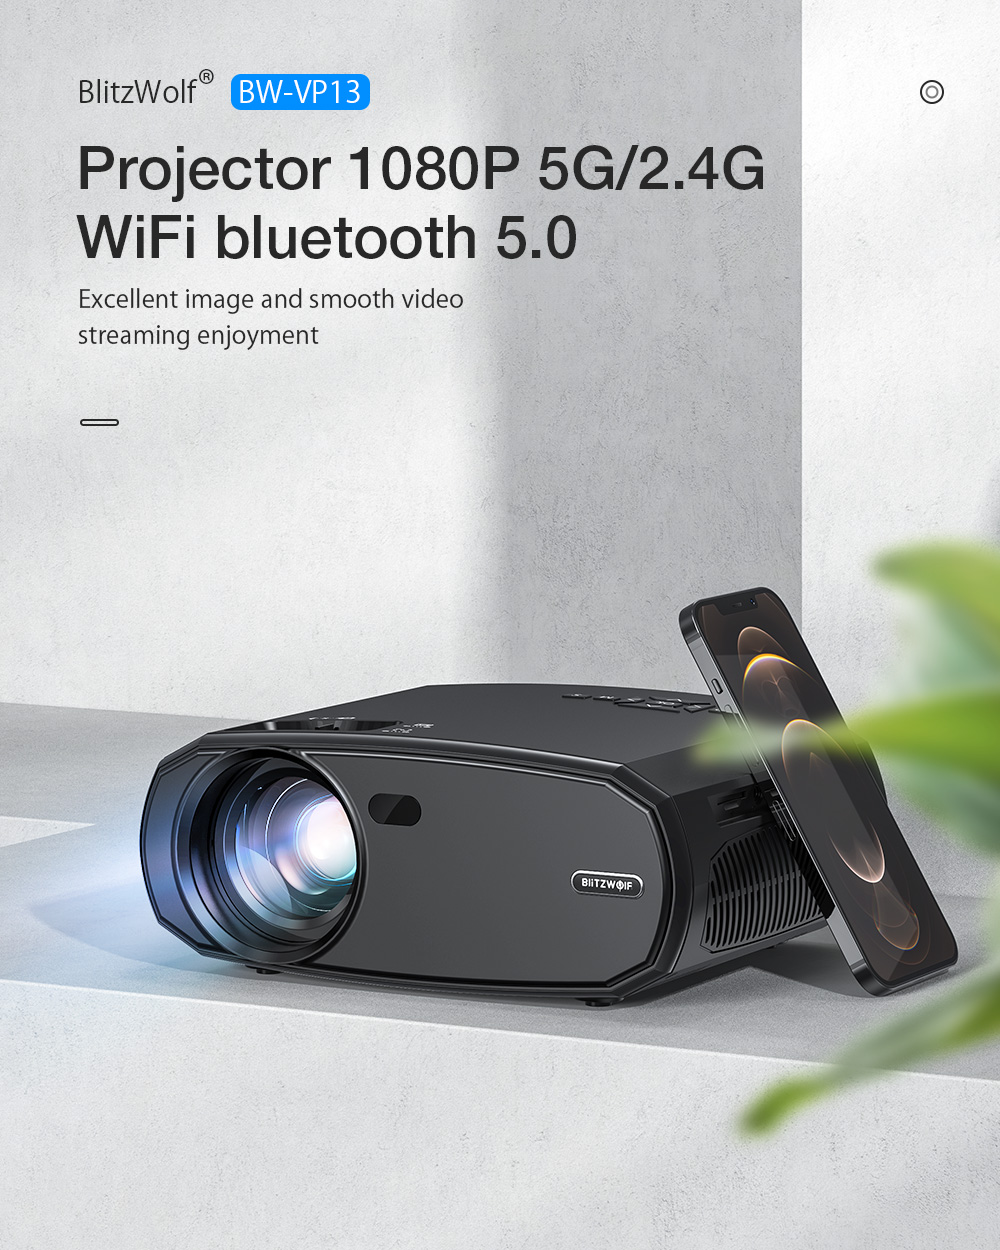 [5G WIFI] BlitzWolf®BW-VP13 1080P WIFI Projector Full HD 2.4G/5G WIFI Cast Screen Mirroring 6000 Lumens Bluetooth 5.0 Manual Focus Keystone Correction 180-Inch Projector for Outdoor Movie Home